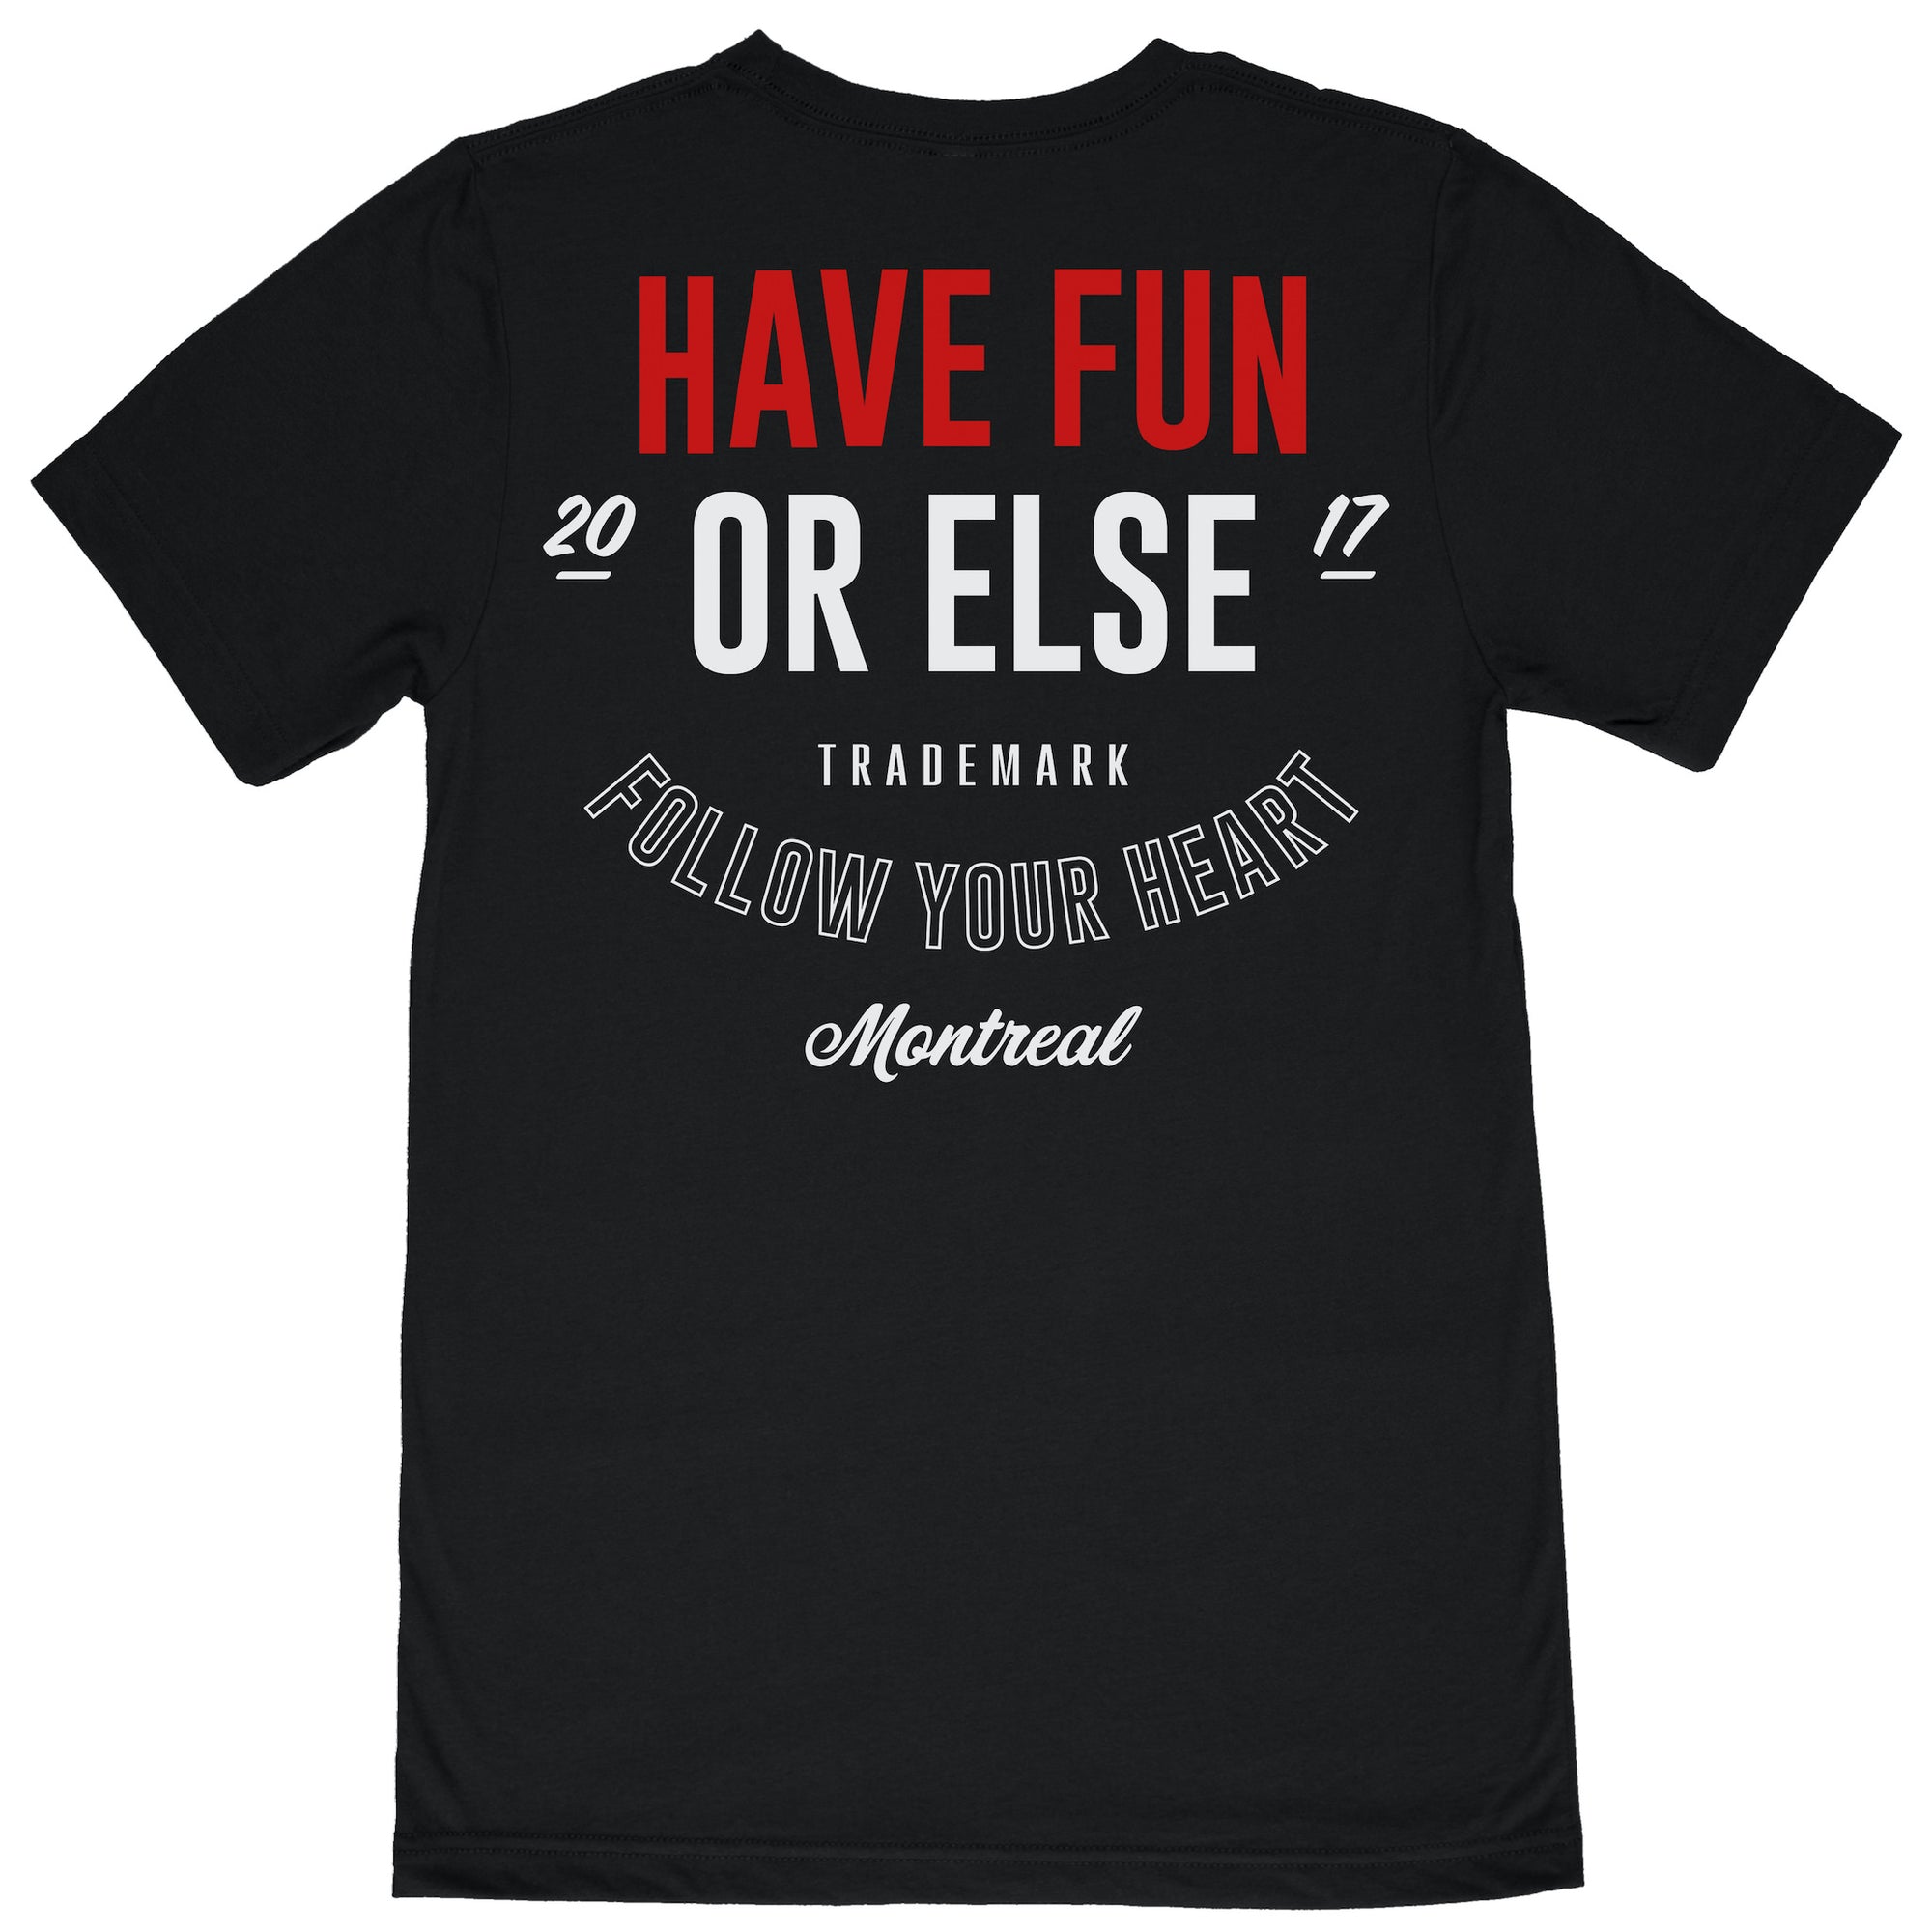 Have Fun Or Else Follow Your Heart black tee, back